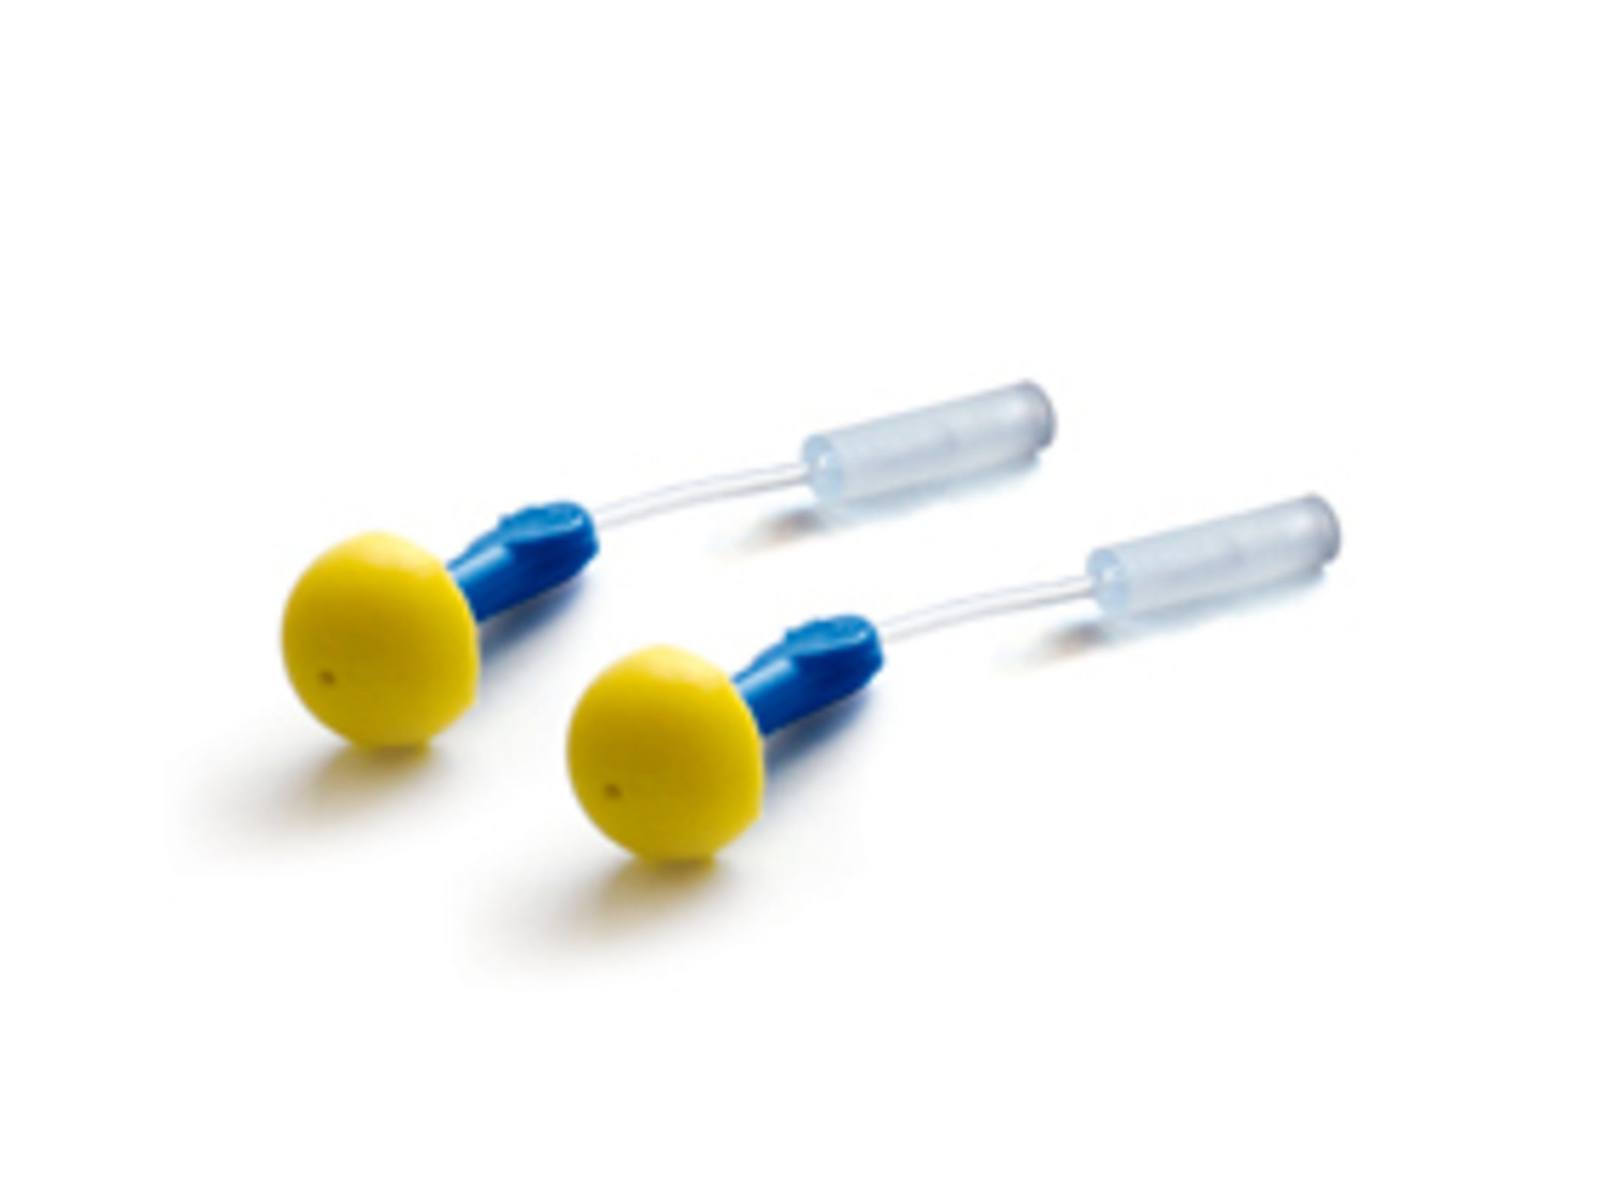 3M E-A-R Express earplugs for fit testing, 393-2008-50